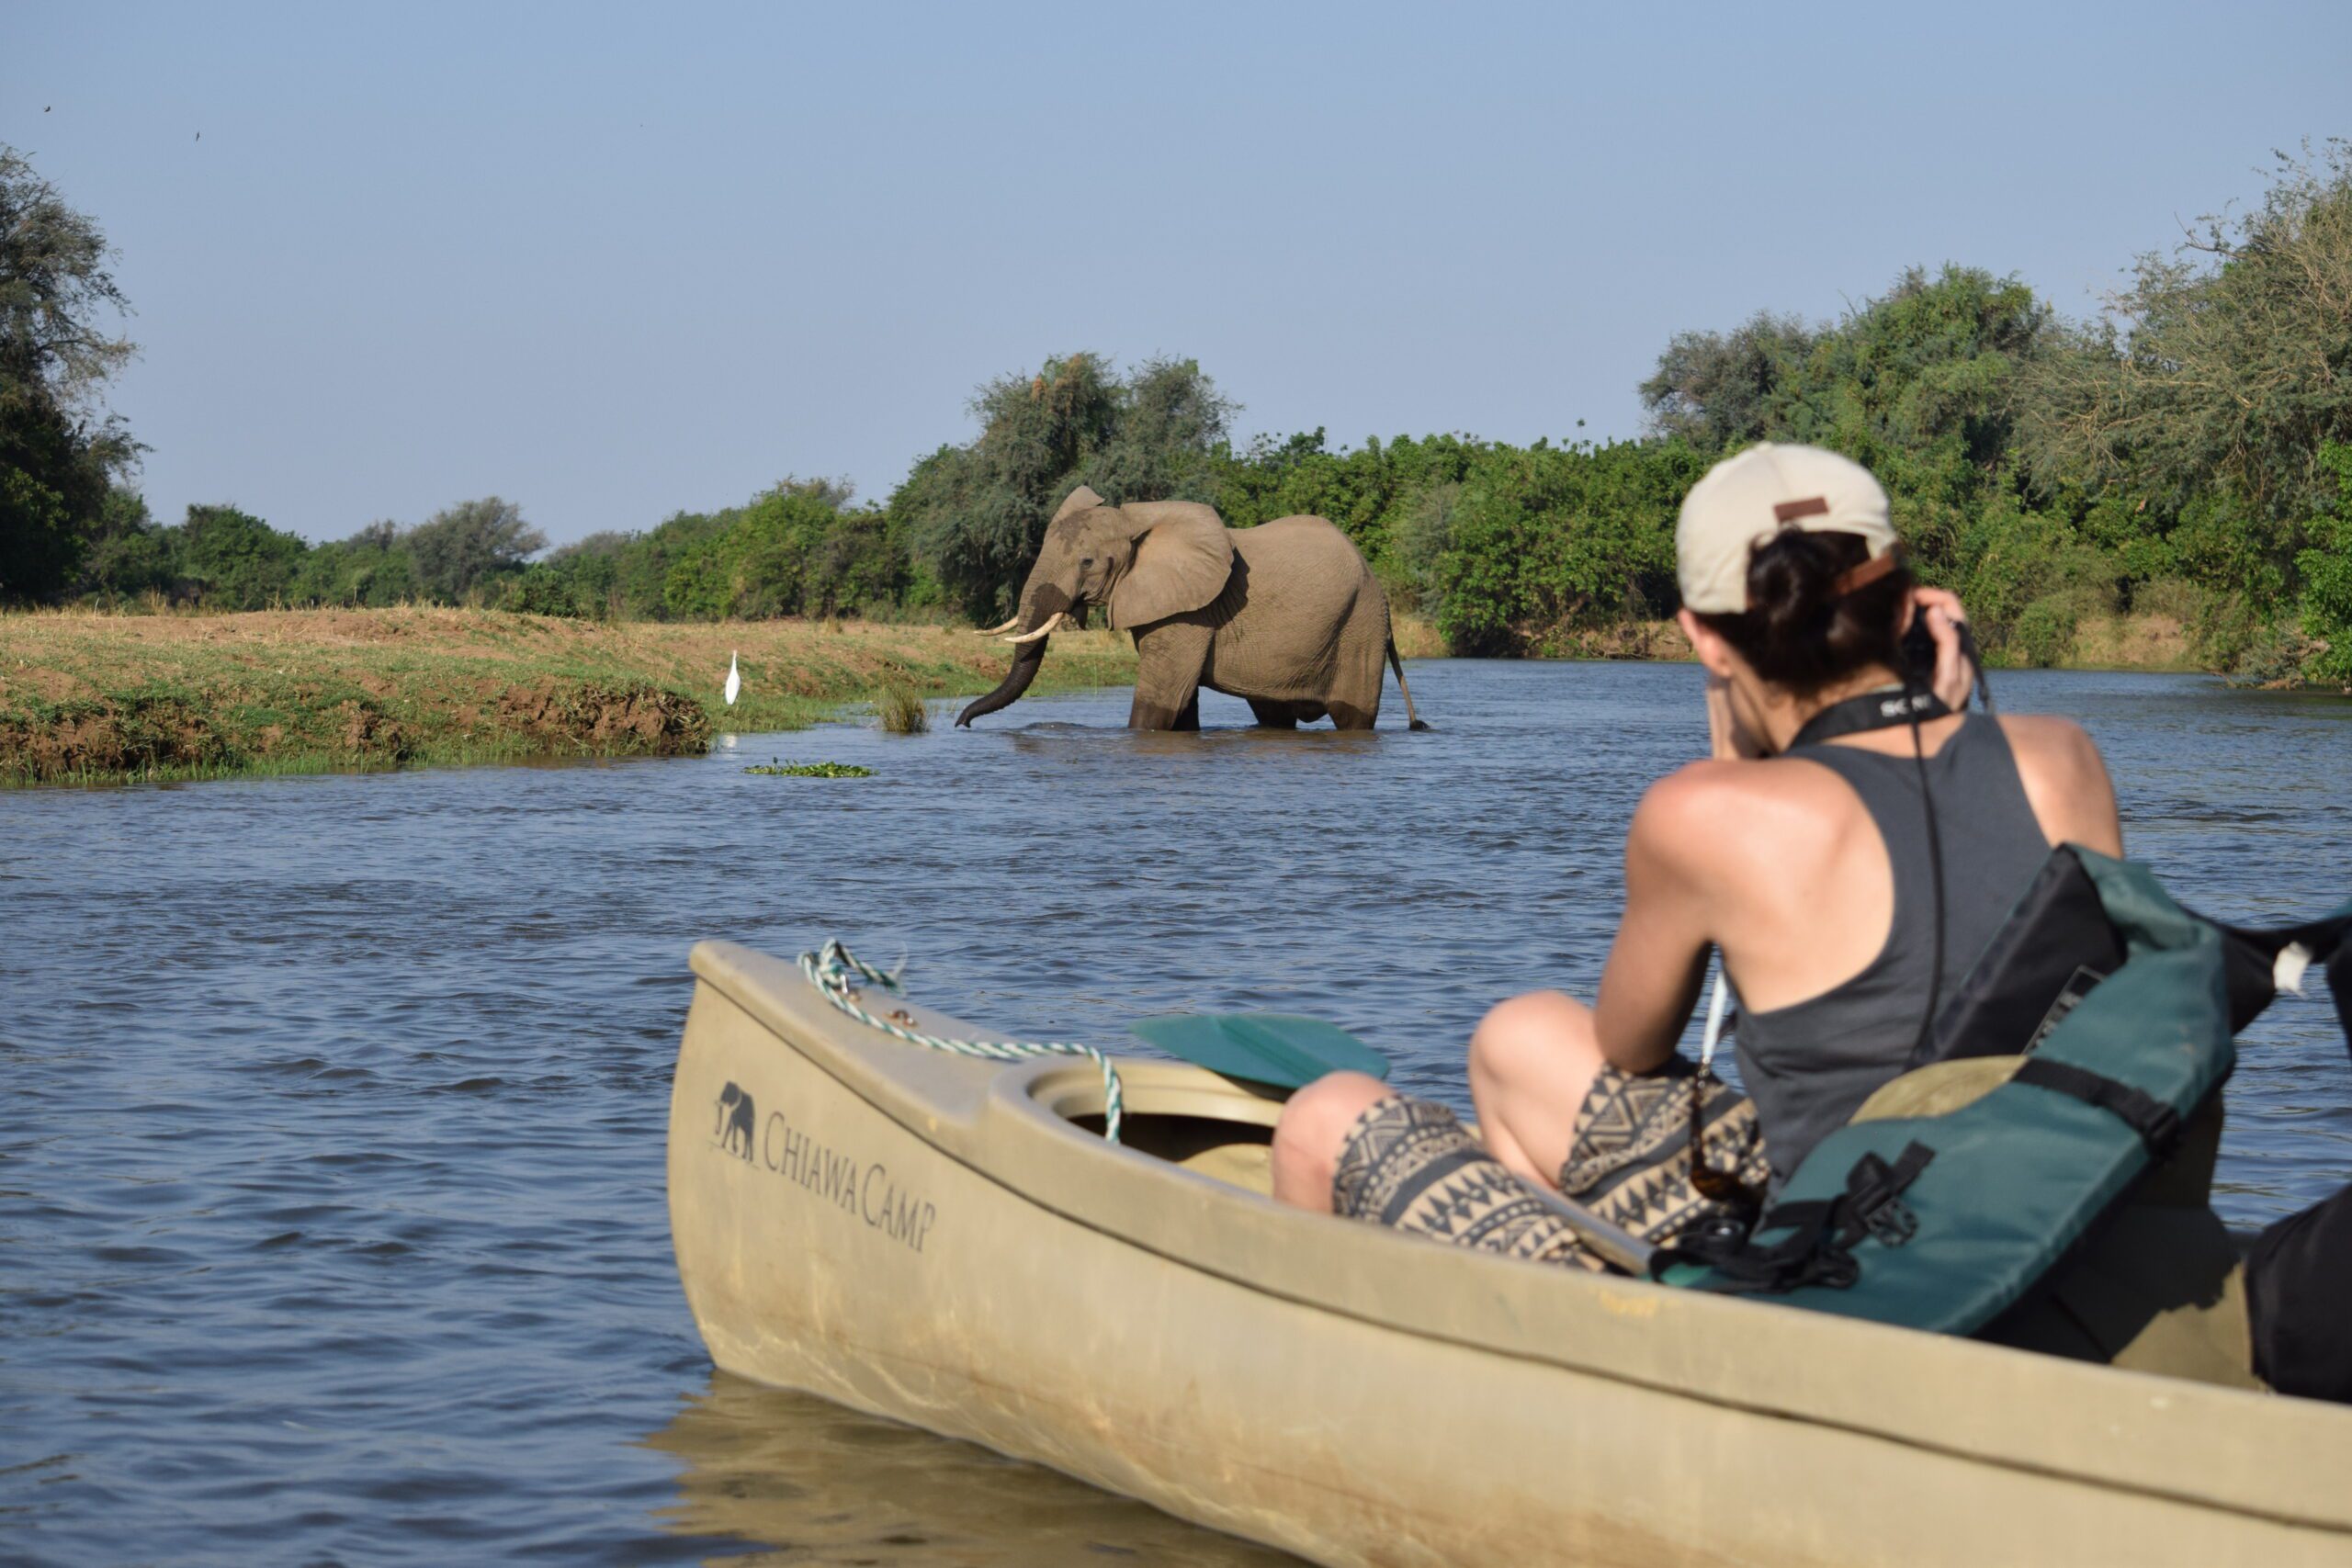 Image of the back of a person sitting in a canoe taking a photograph of an elephant in the river.